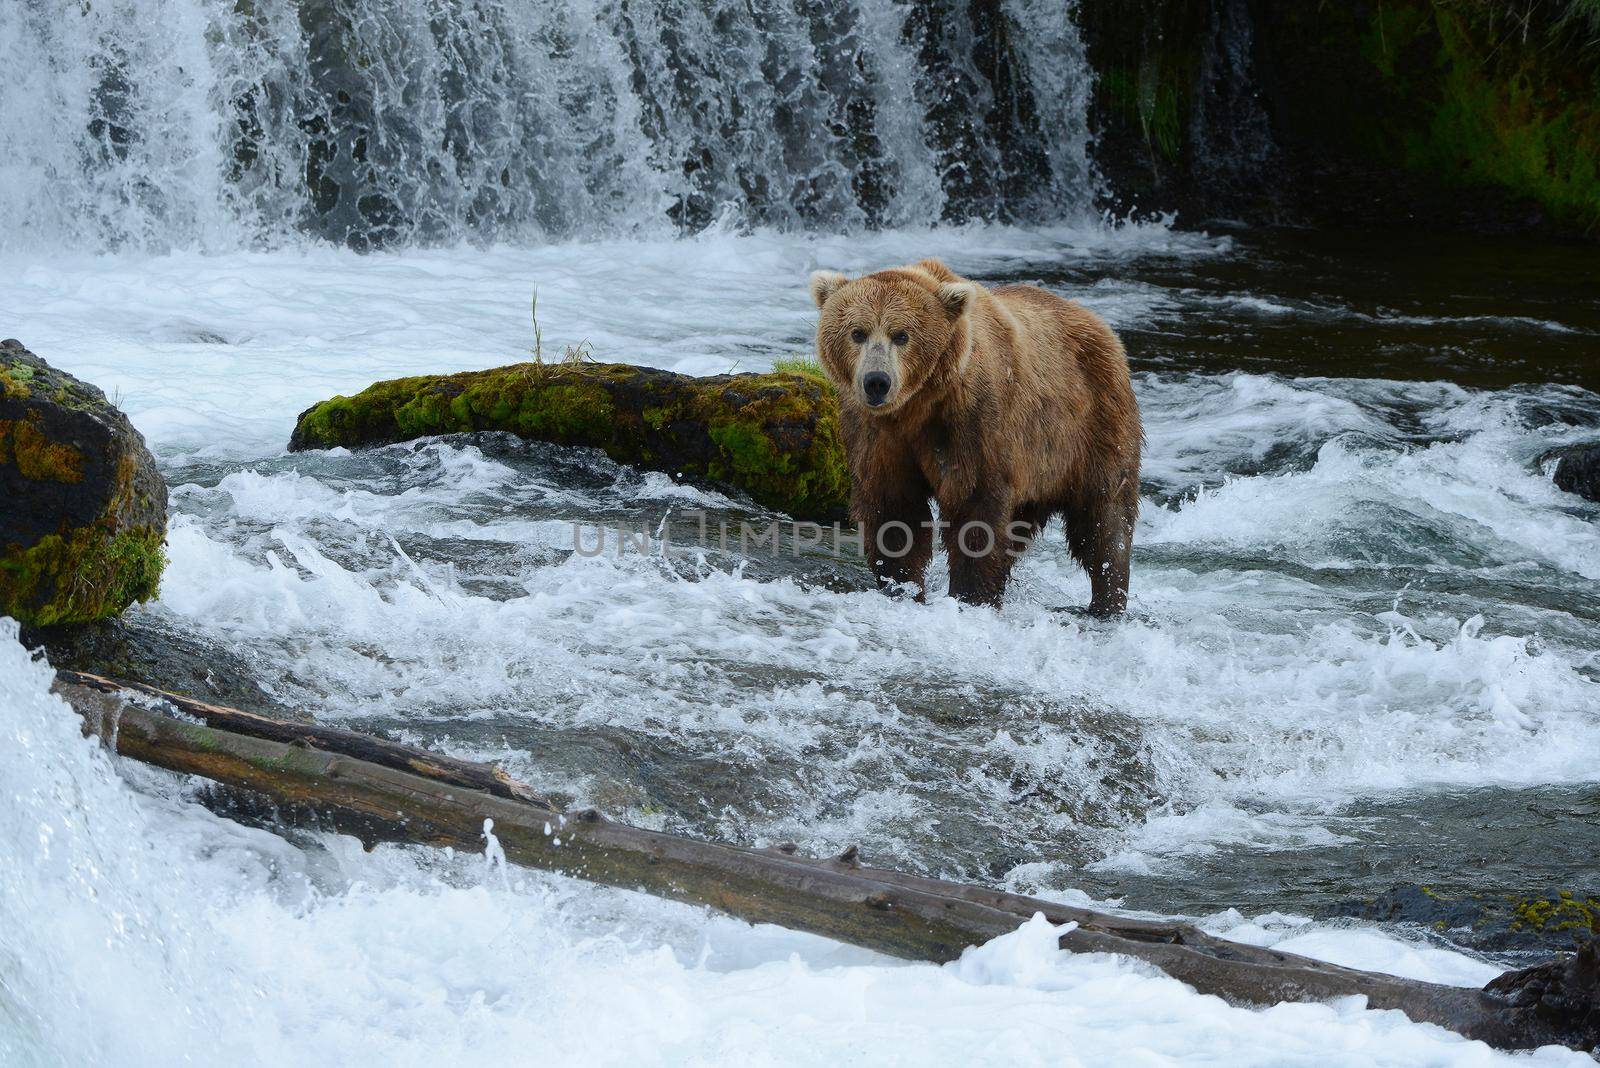 grizzly bear hunting salmon by porbital